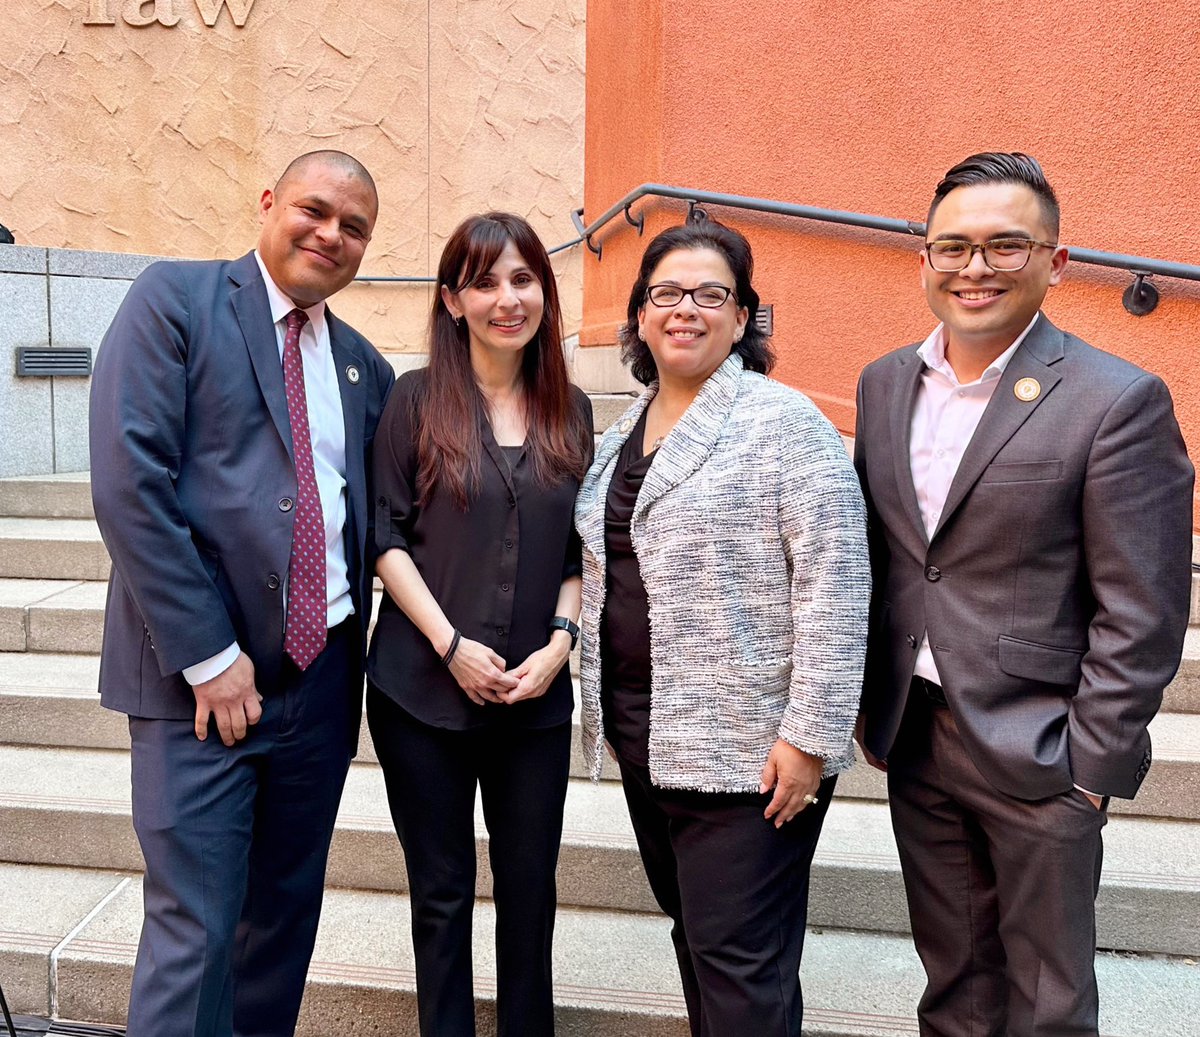 Best wishes to @sonyachristian on becoming Chancellor of @CalCommColleges, the nation's largest higher education system! 🎓🌟 Exciting times ahead as we work together to empower students in achieving their goals. #SBCCDintheCommunity #CAHigherEd